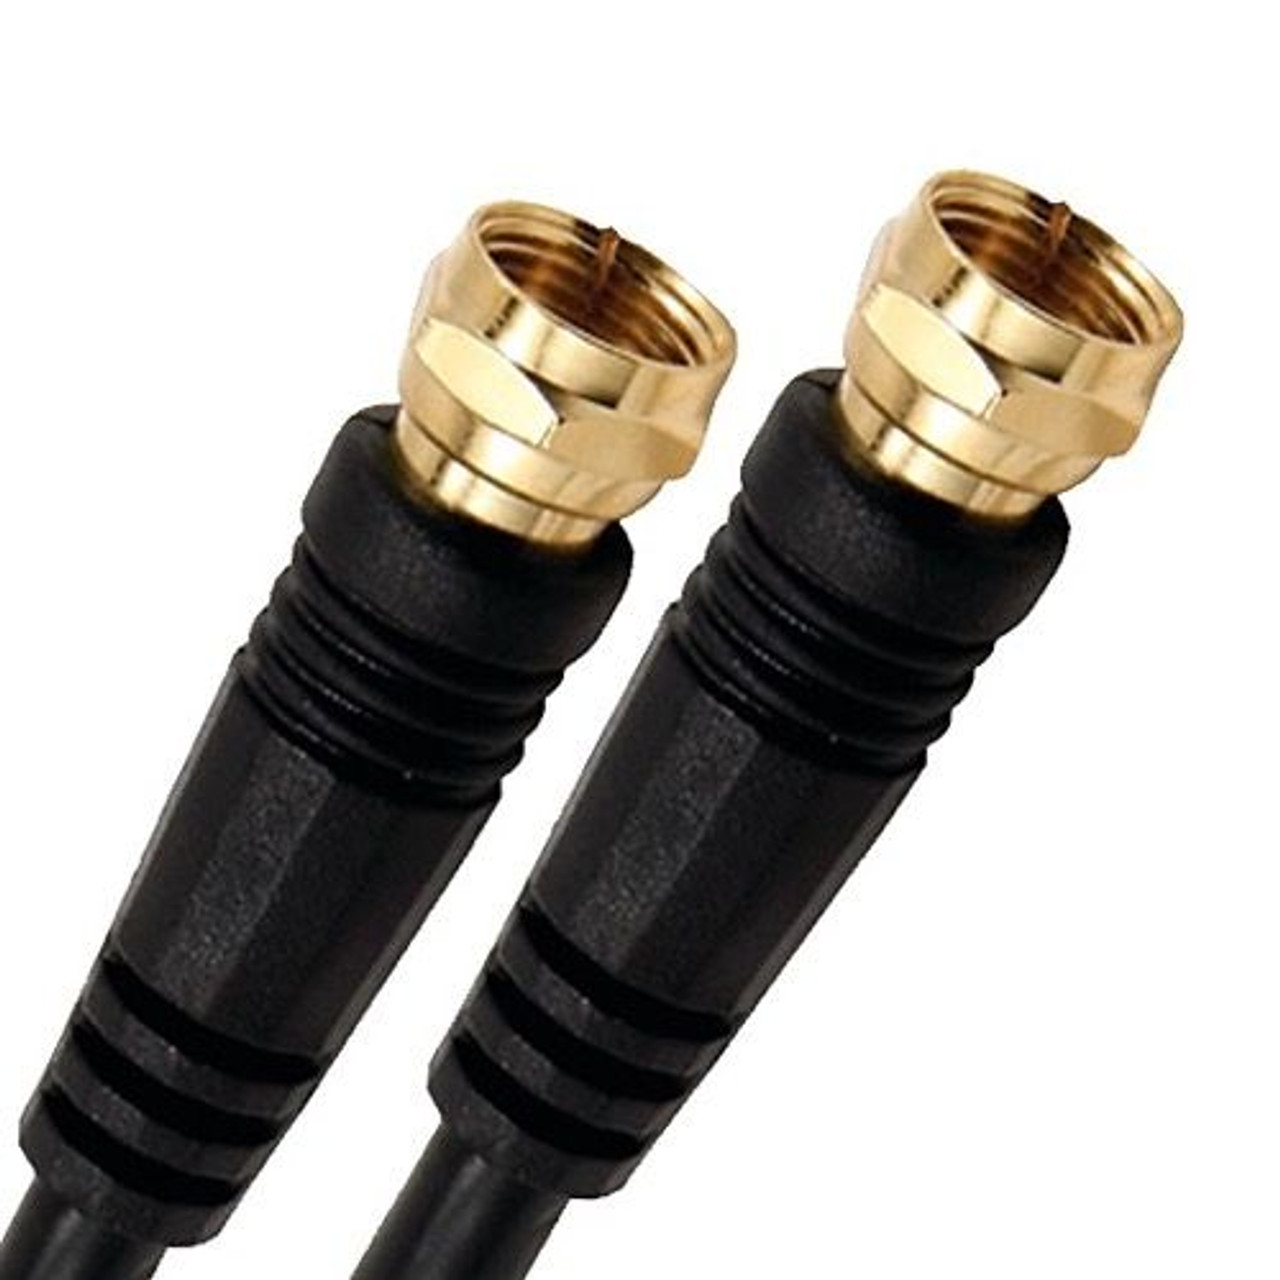 Channel Master CM-3711 Coaxial Antenna Cable 75' FT Black RG6 with F Male to Male All Weather 75 Ohm RG-6 Coax 18-AWG Digital Satellite Dish TV Antenna Video Signal Distribution Line Reception, Part # CM3711